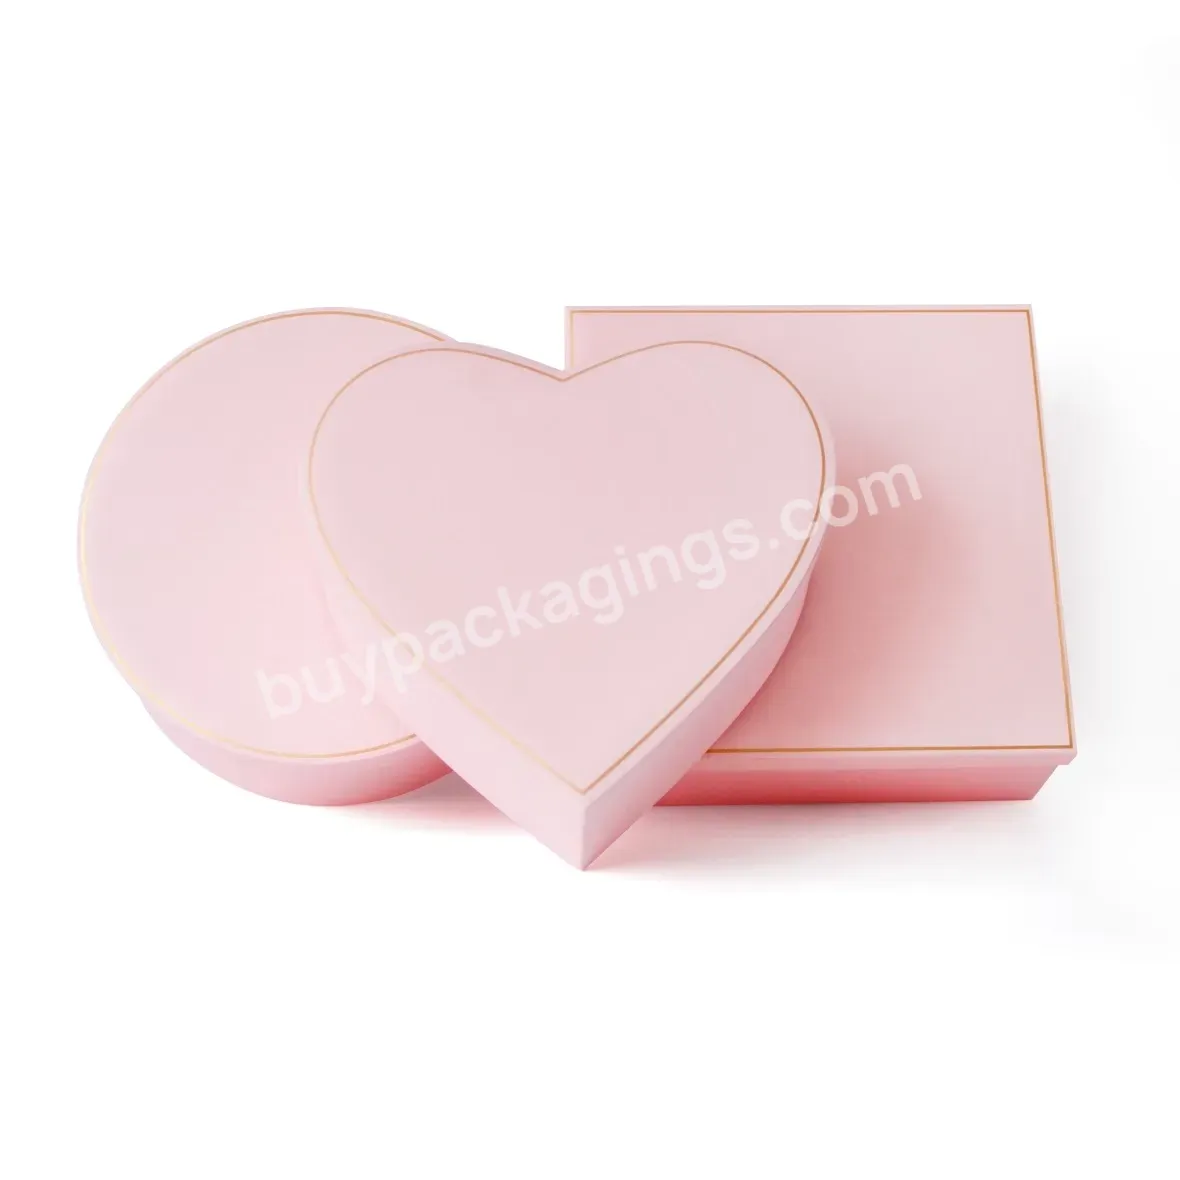 Wholesale Luxury Surface Silk Smooth Finished Flower Gift Paper Box Heart Round Square Shaped Cardboard Box - Buy Surface Silk Smooth Finished Paper Box,Flower Gift Paper Box,Heart Round Square Shaped Cardboard Box.